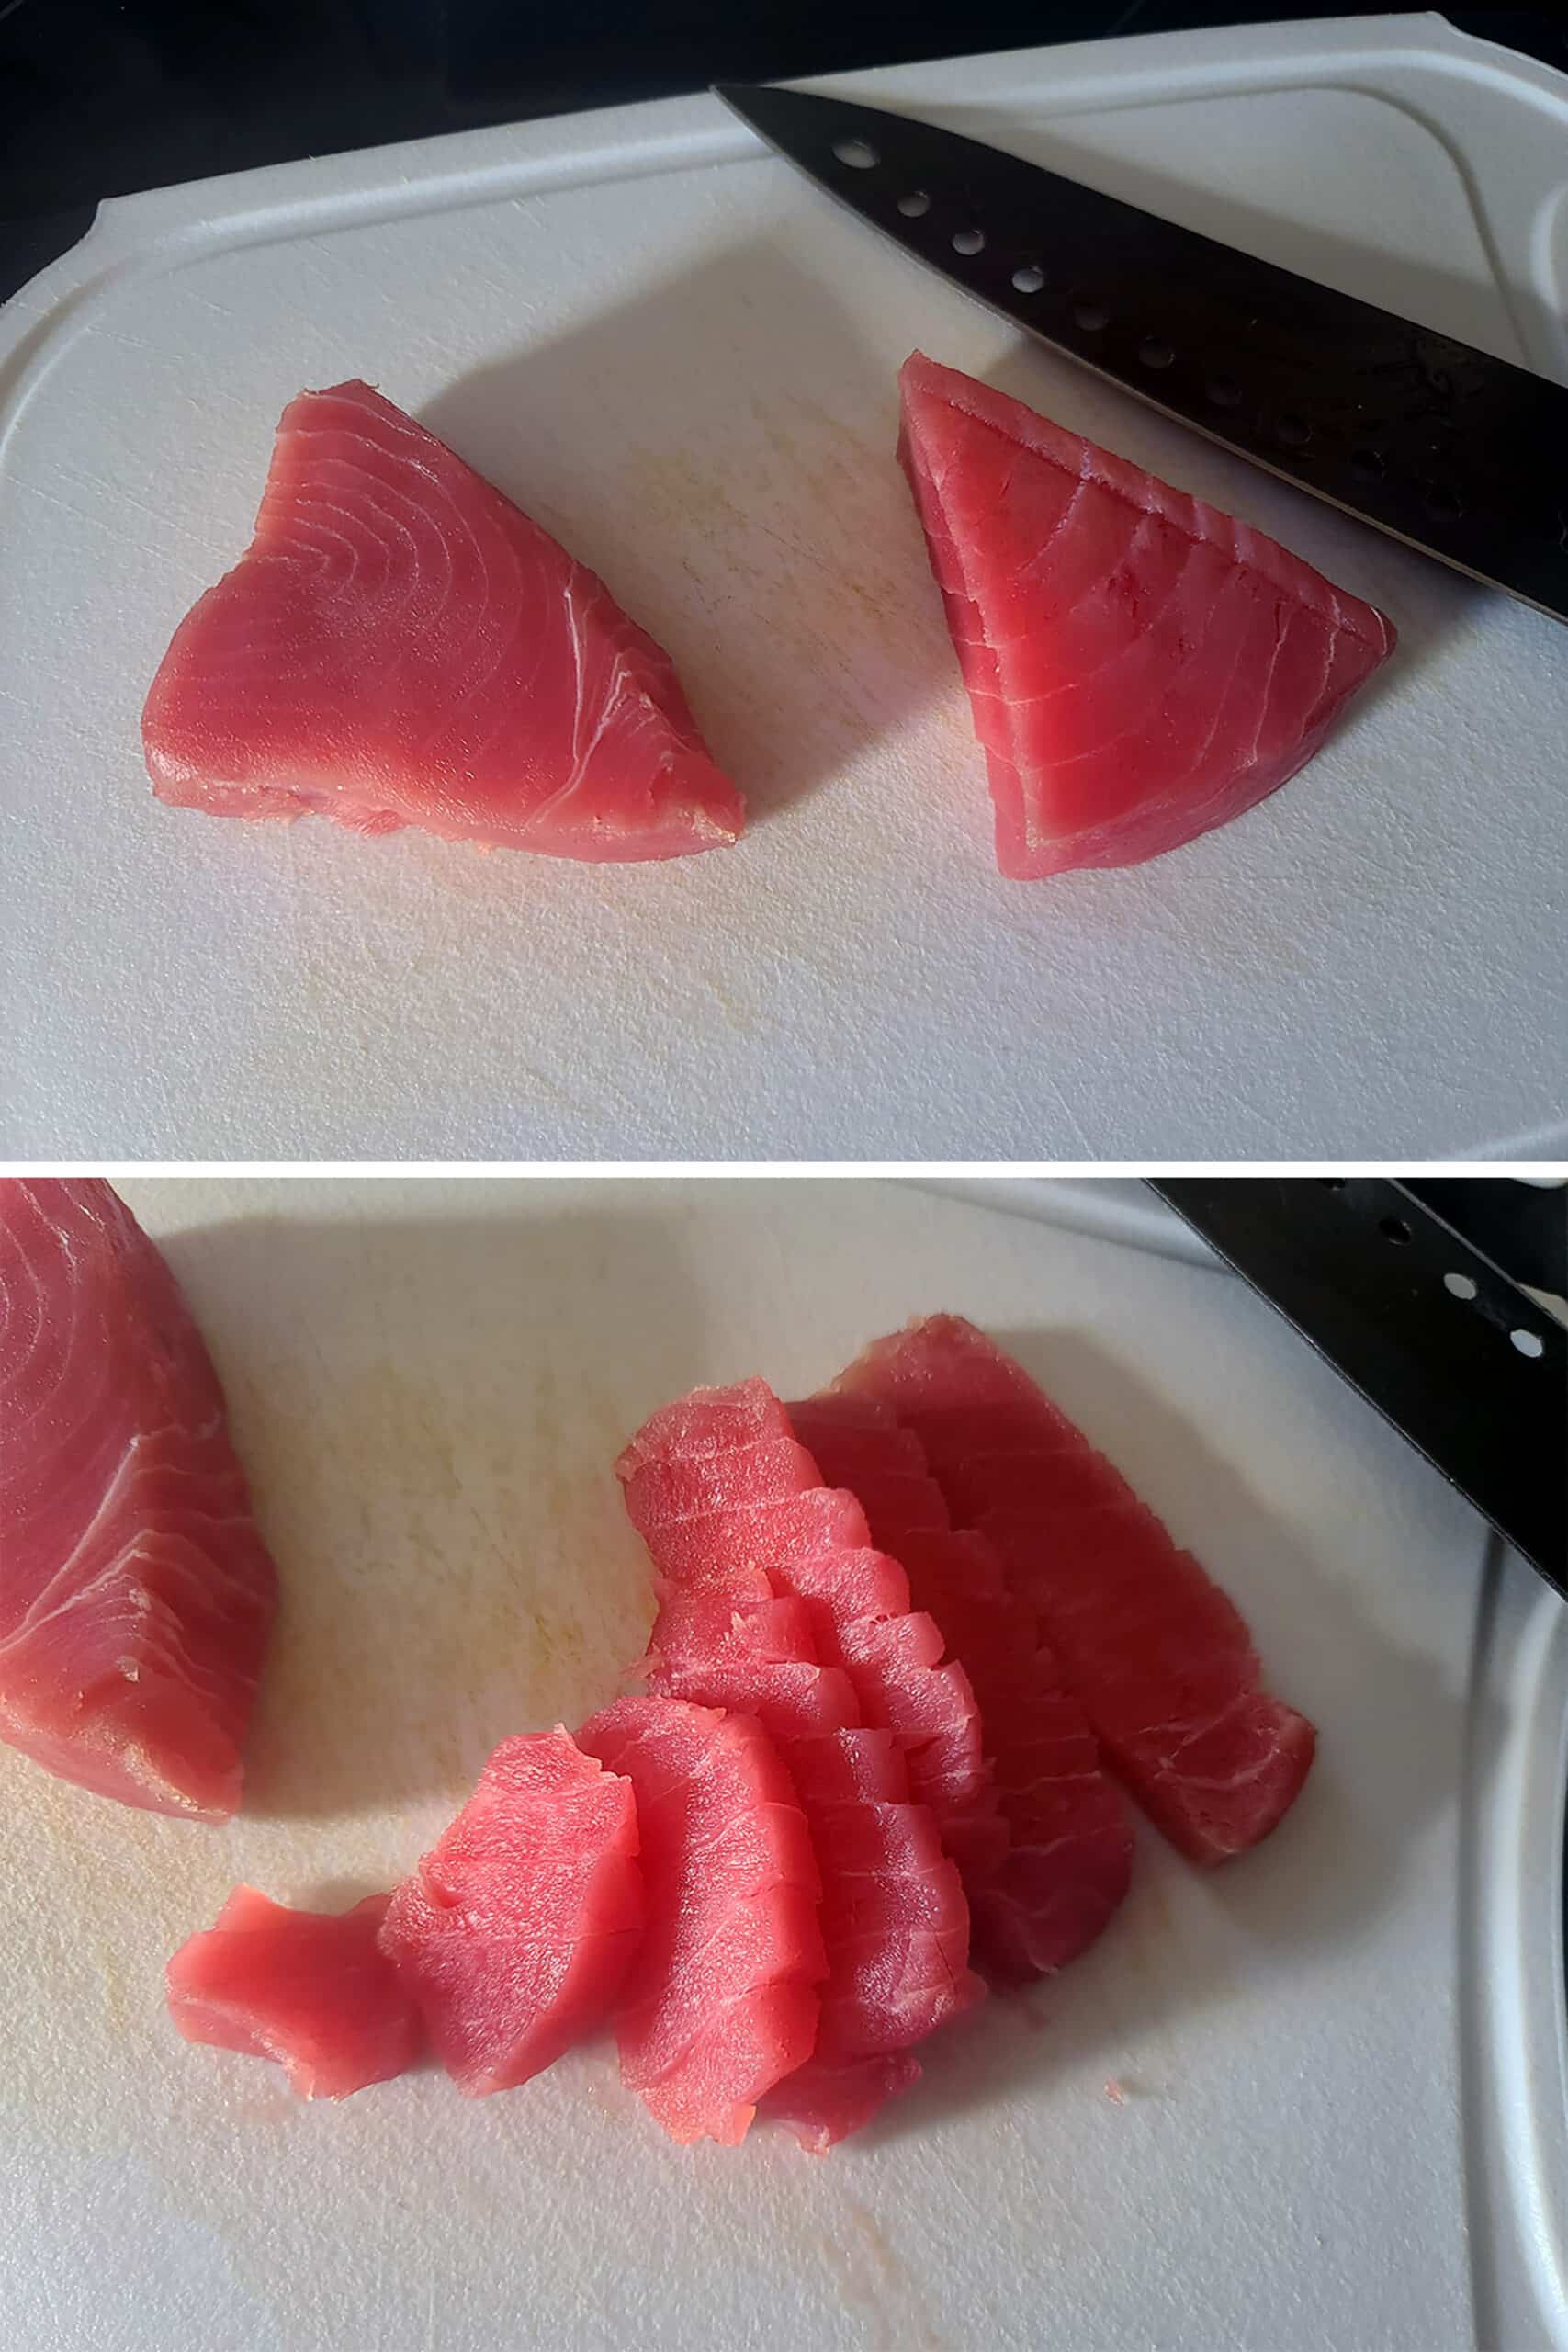 A 2 part image showing 2 ahi tuna steaks being thinly sliced.